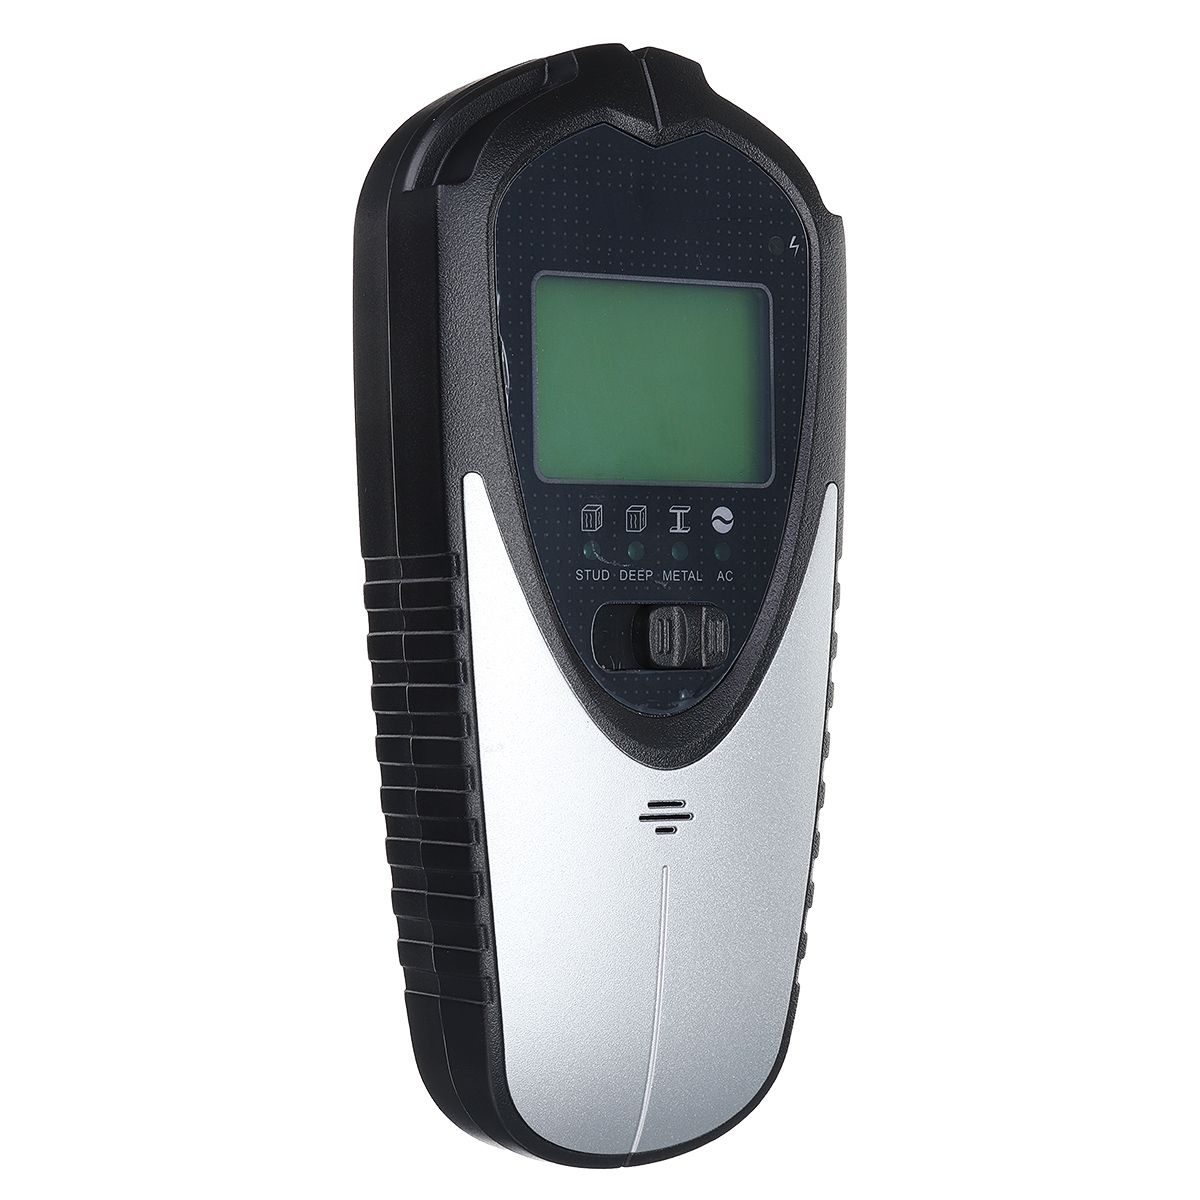 4-In-1-Backlit-Wall-Scanner-Stud-Finder-Center-Beam-Sensor-LCD-Display-Portable-Wire-For-Wood-Electr-1722166